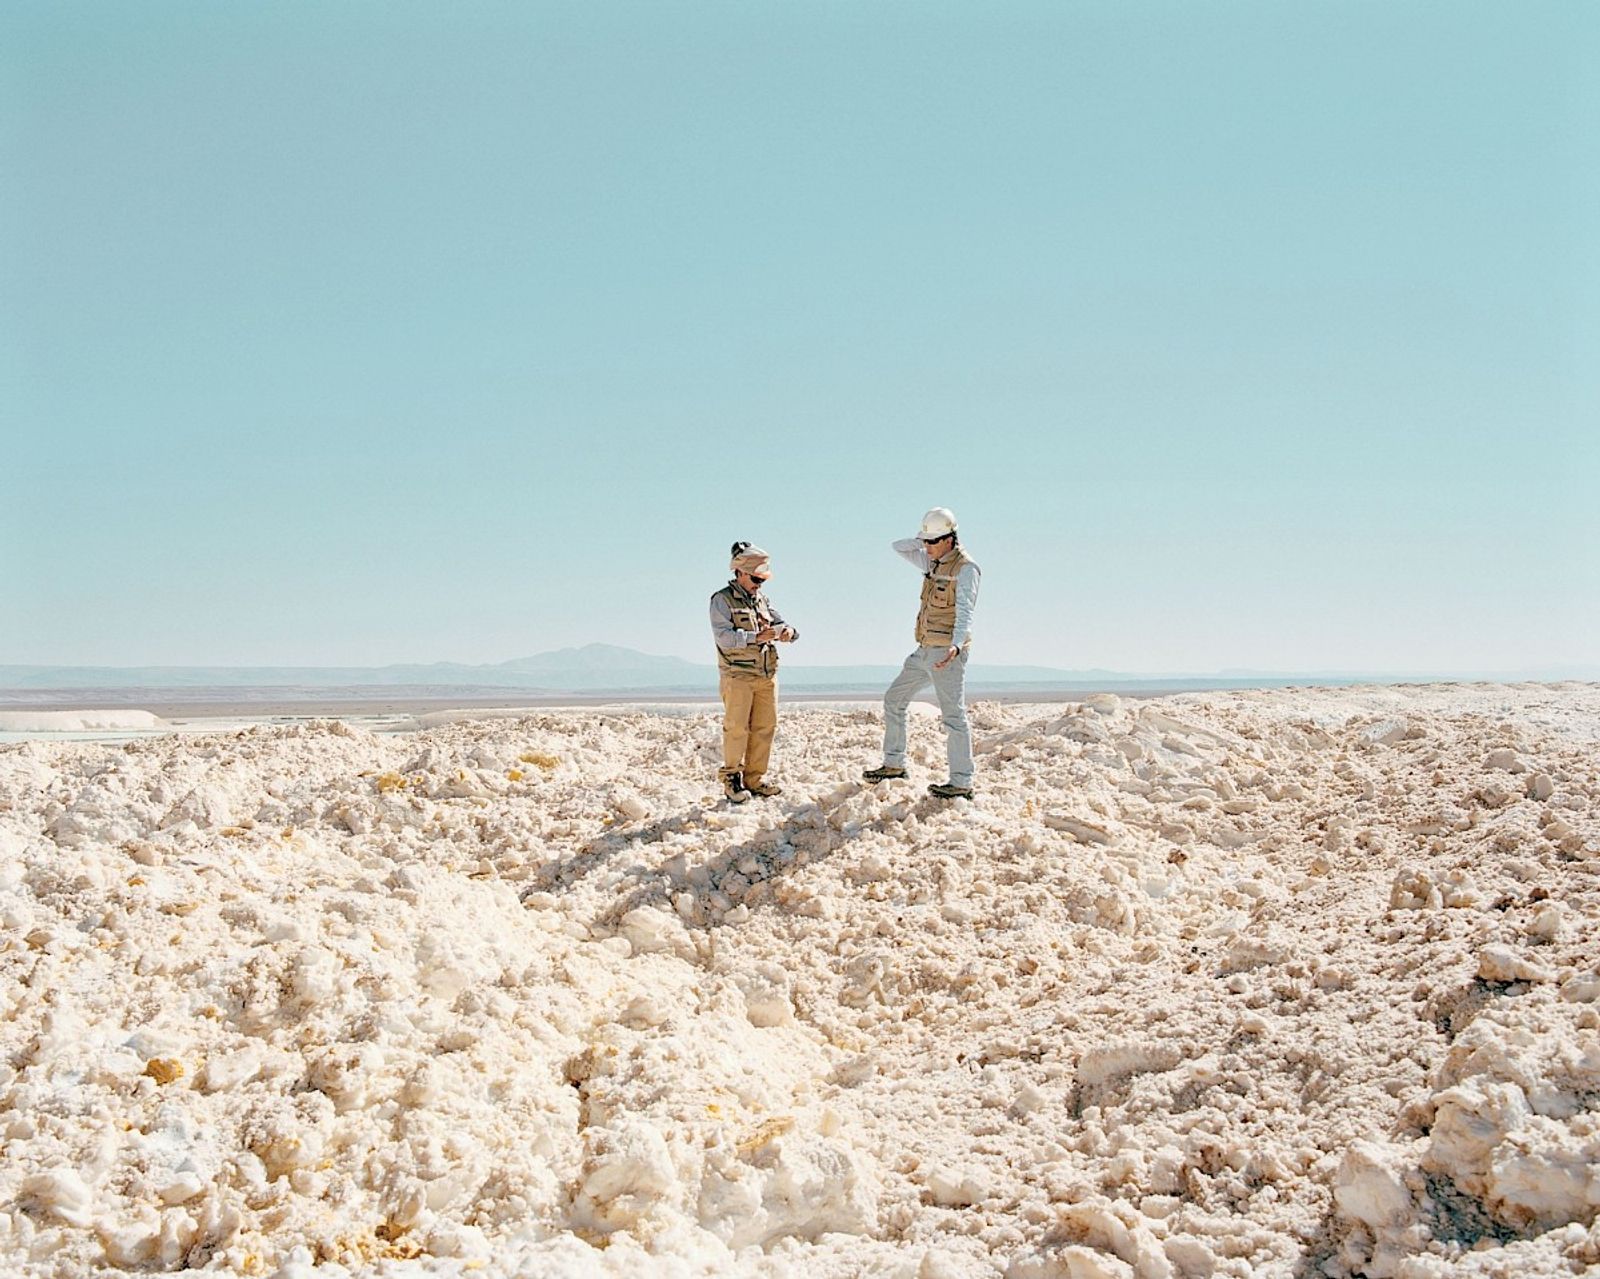 © Catherine Hyland - Image from the Lithium Mining photography project